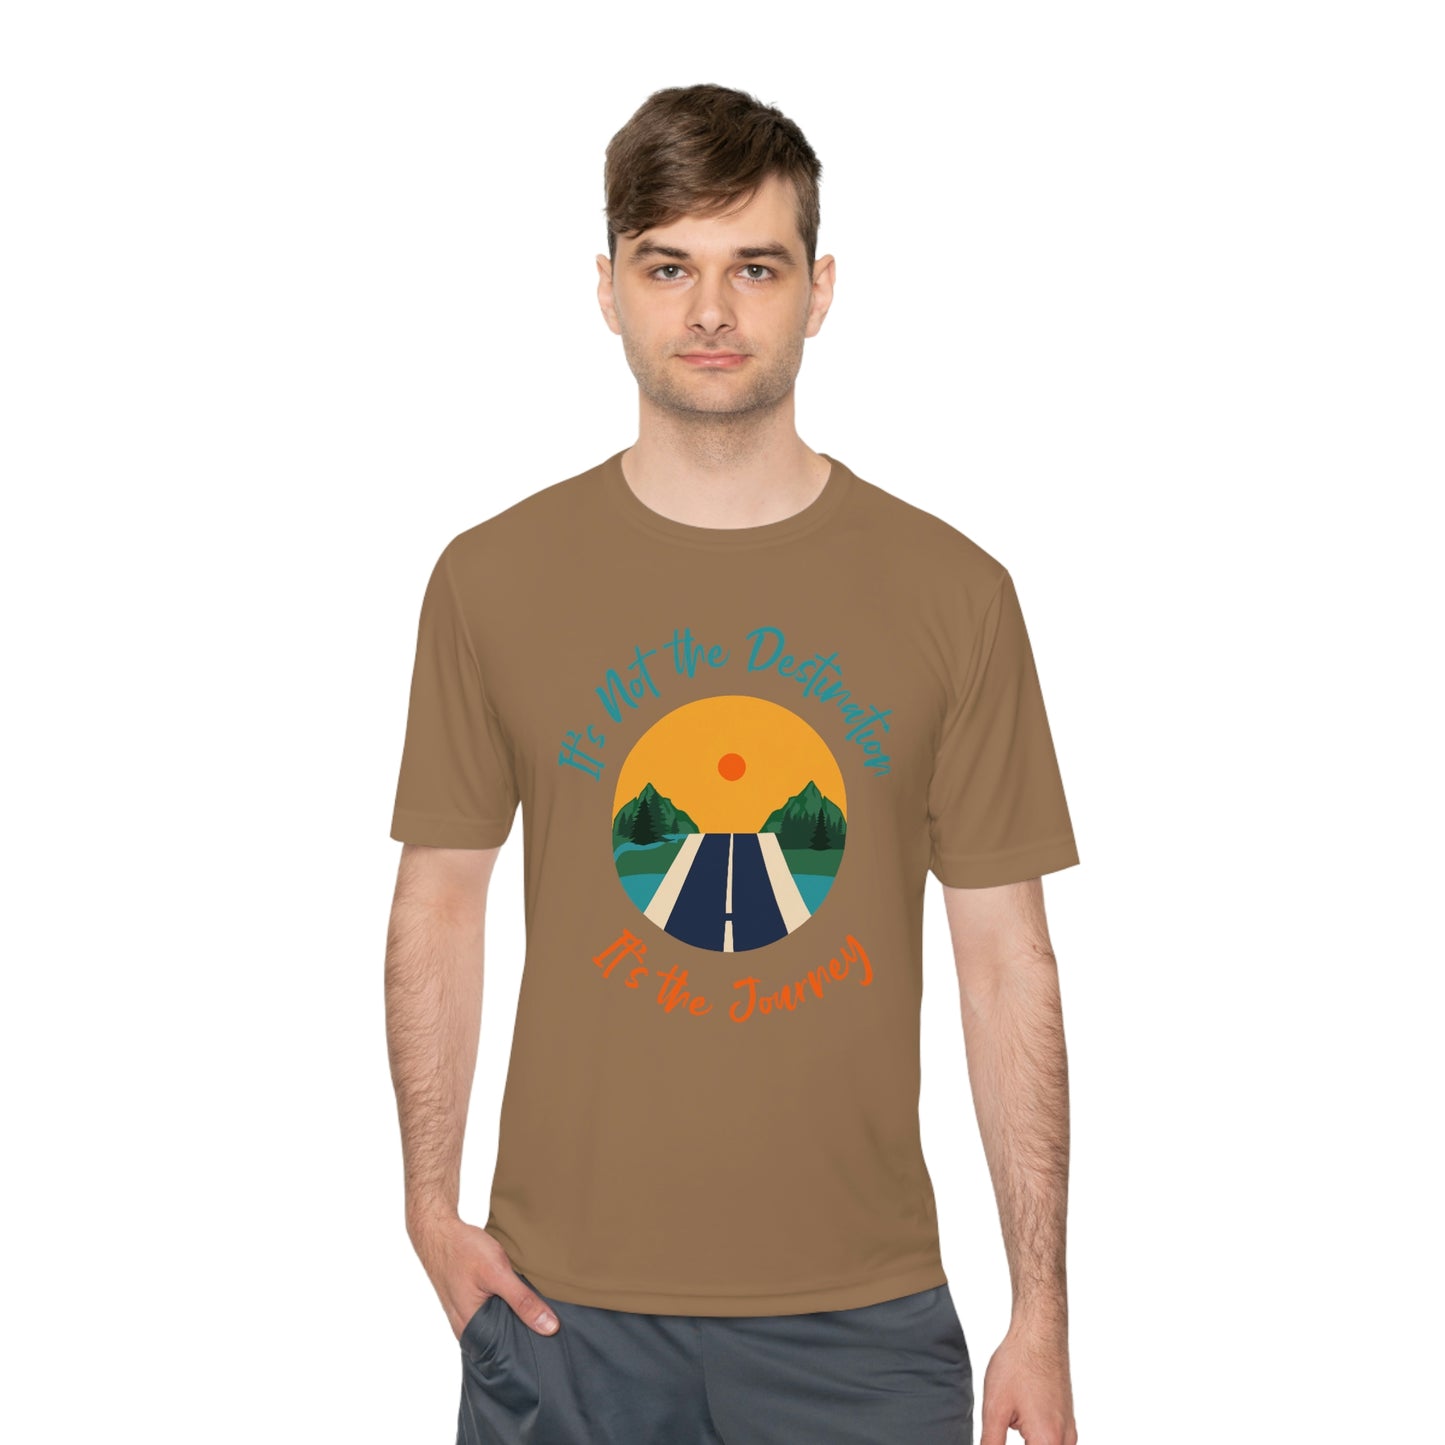 Mock up of a slim man wearing the brown t-shirt